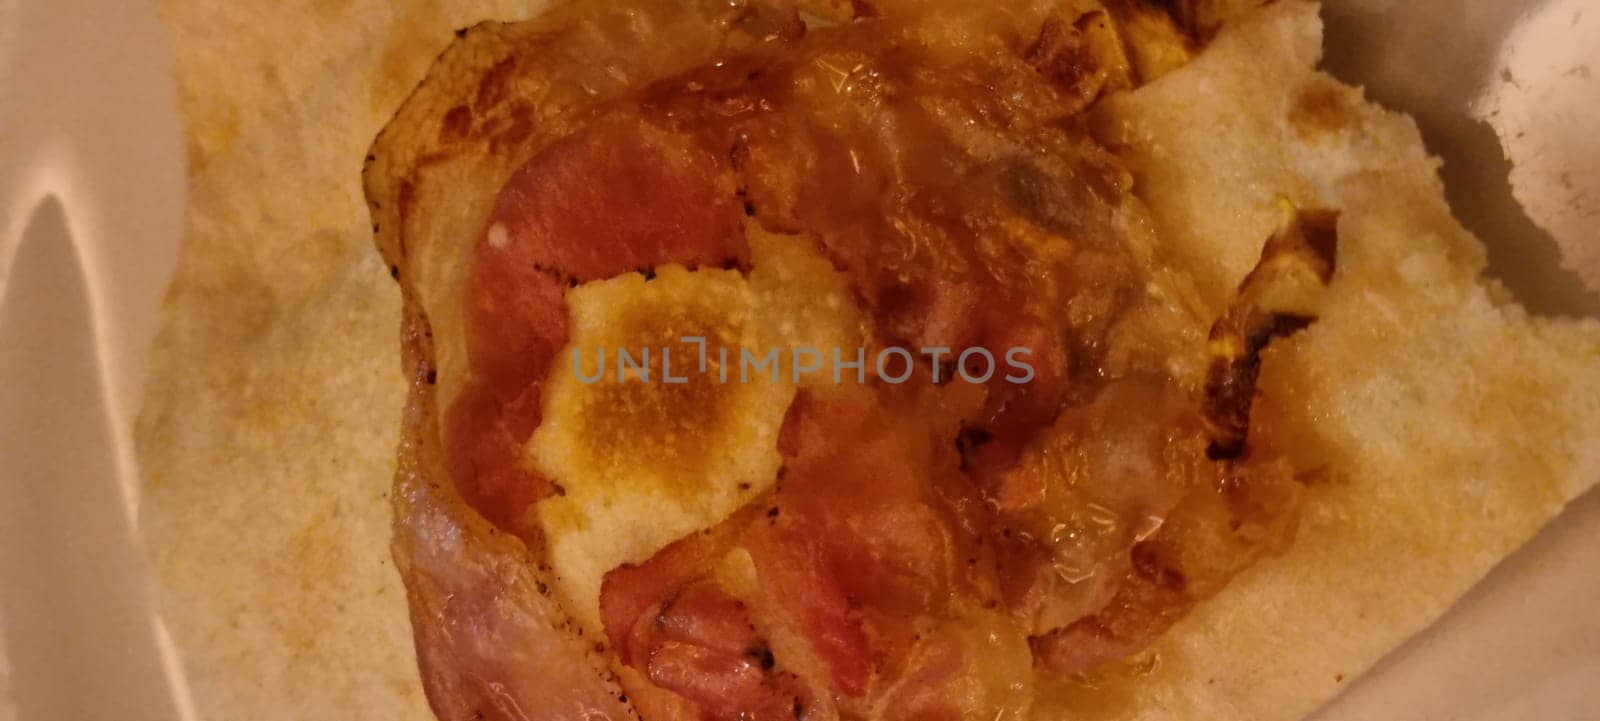 Tantalizing close-up shot capturing the melted cheese and ham on a toasted sandwich